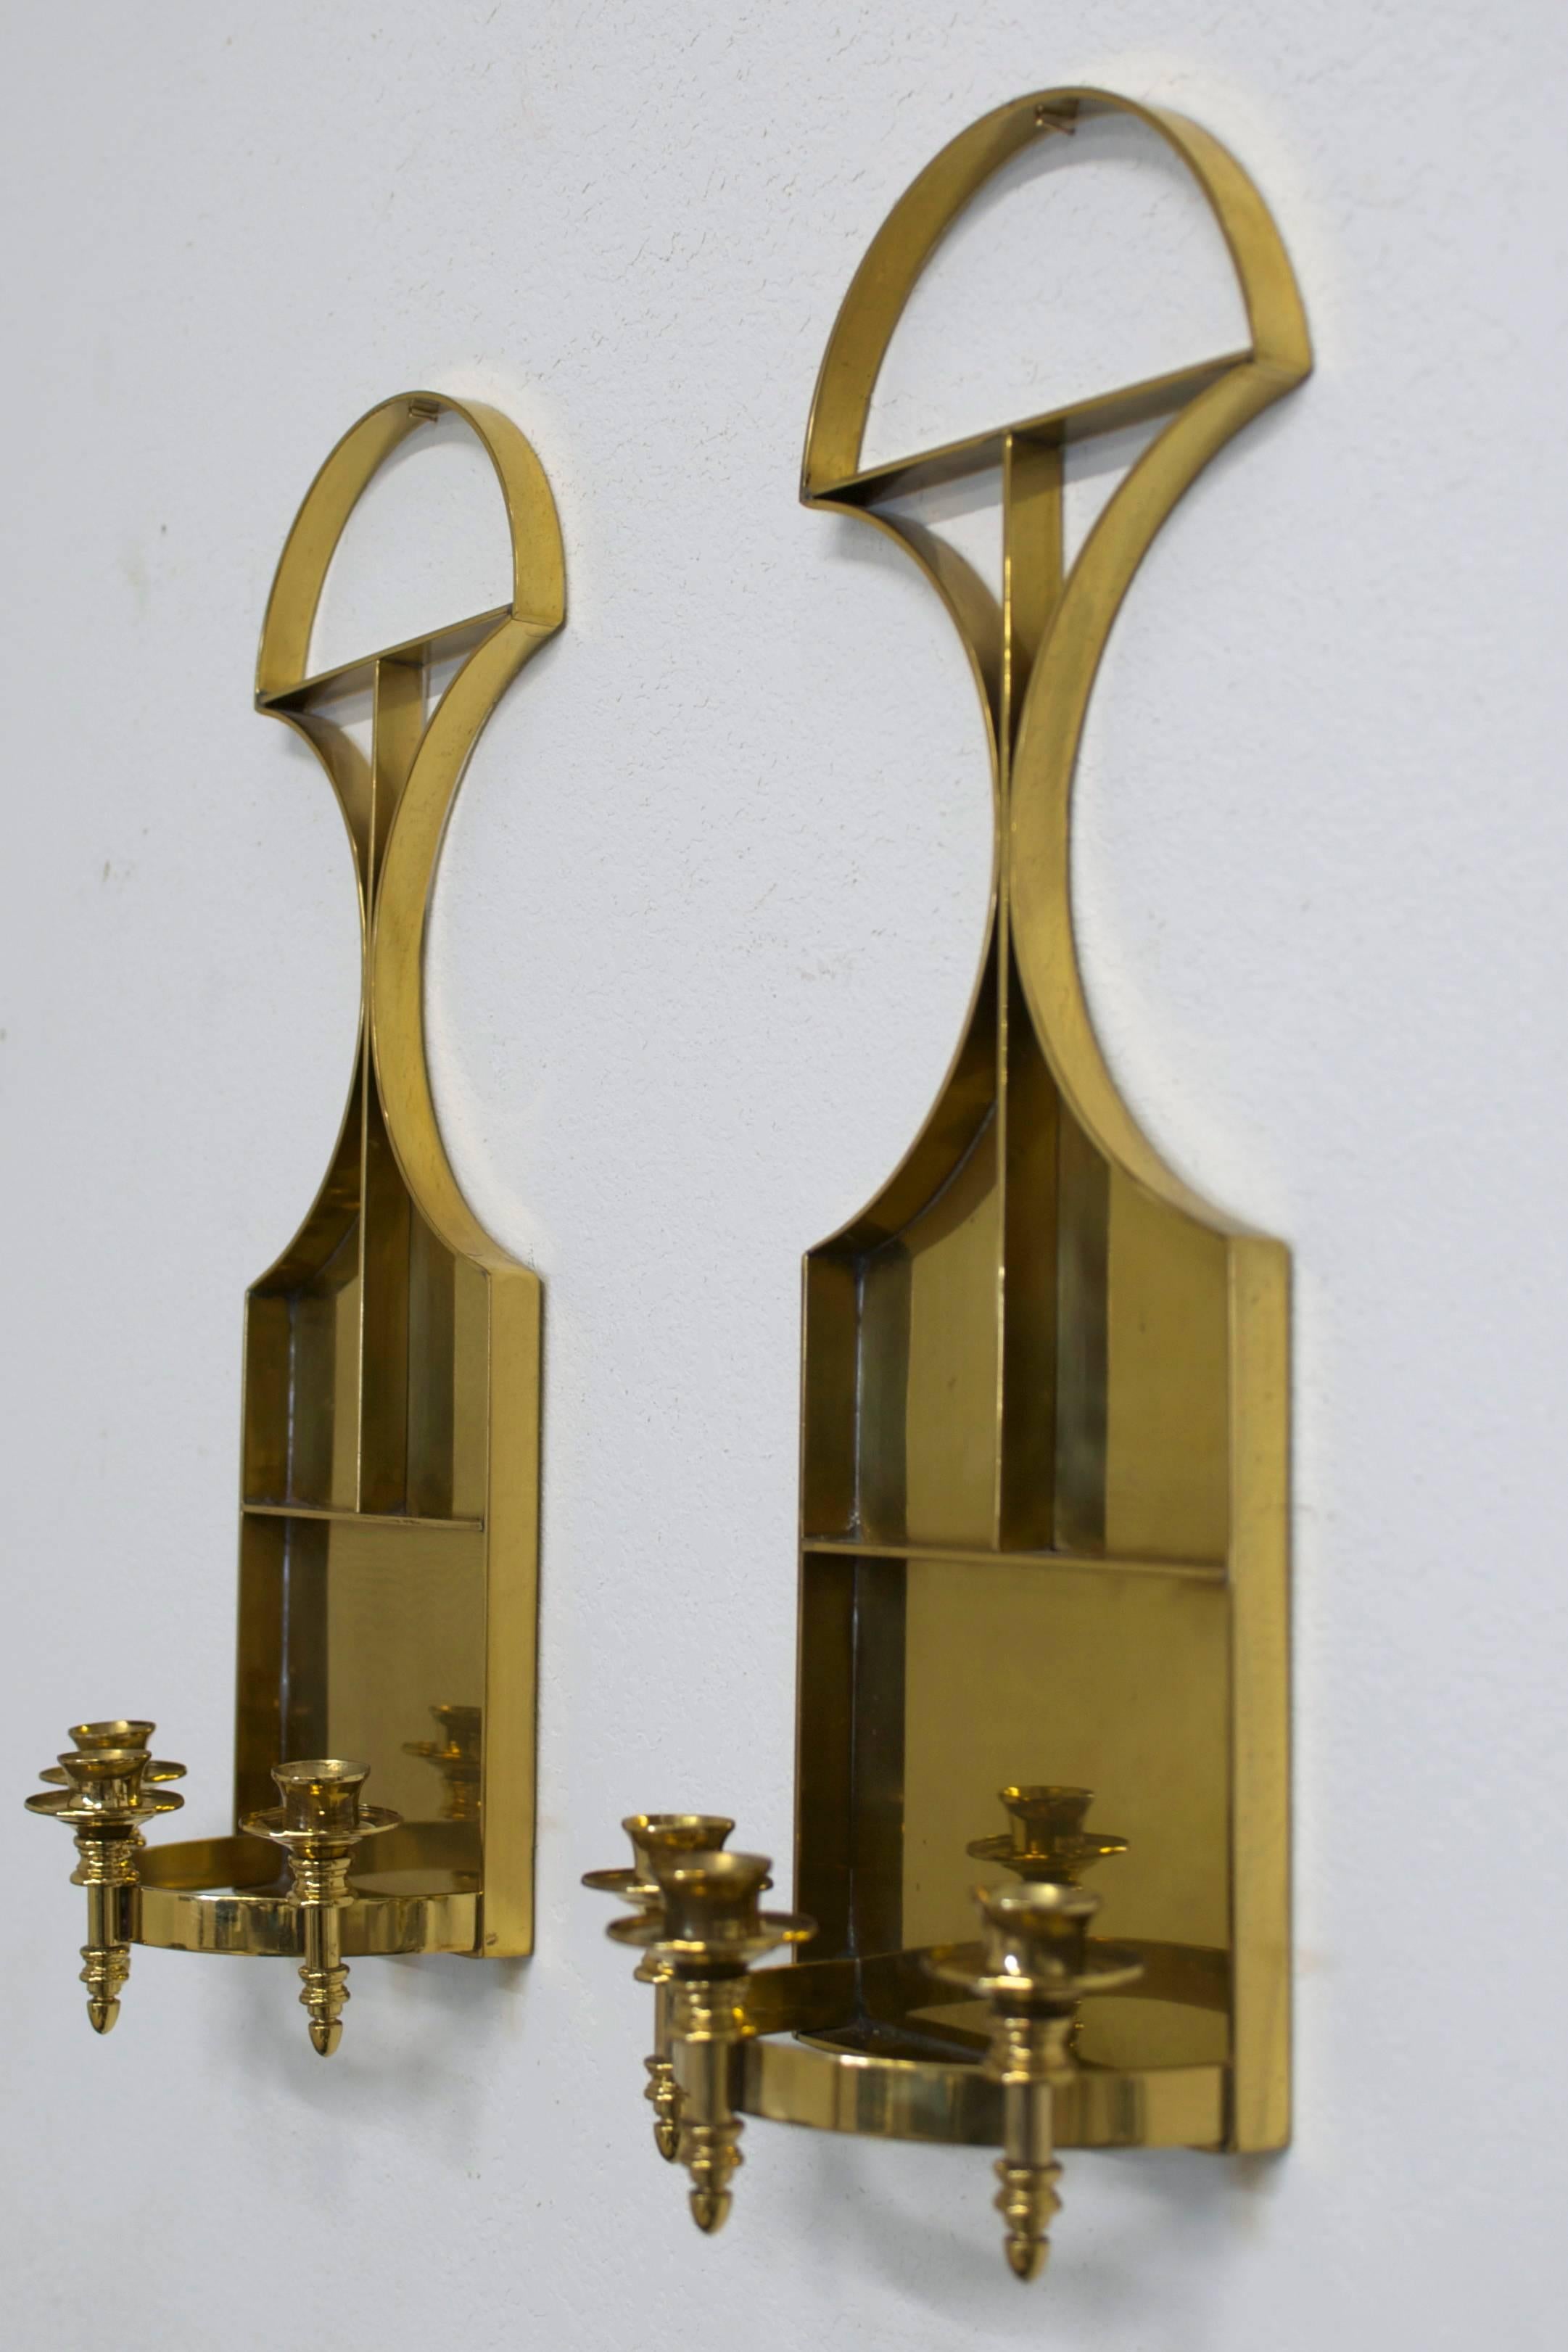 Pair of Solid Brass Mid-Century Candle Wall Sconces In Good Condition For Sale In Palm Springs, CA